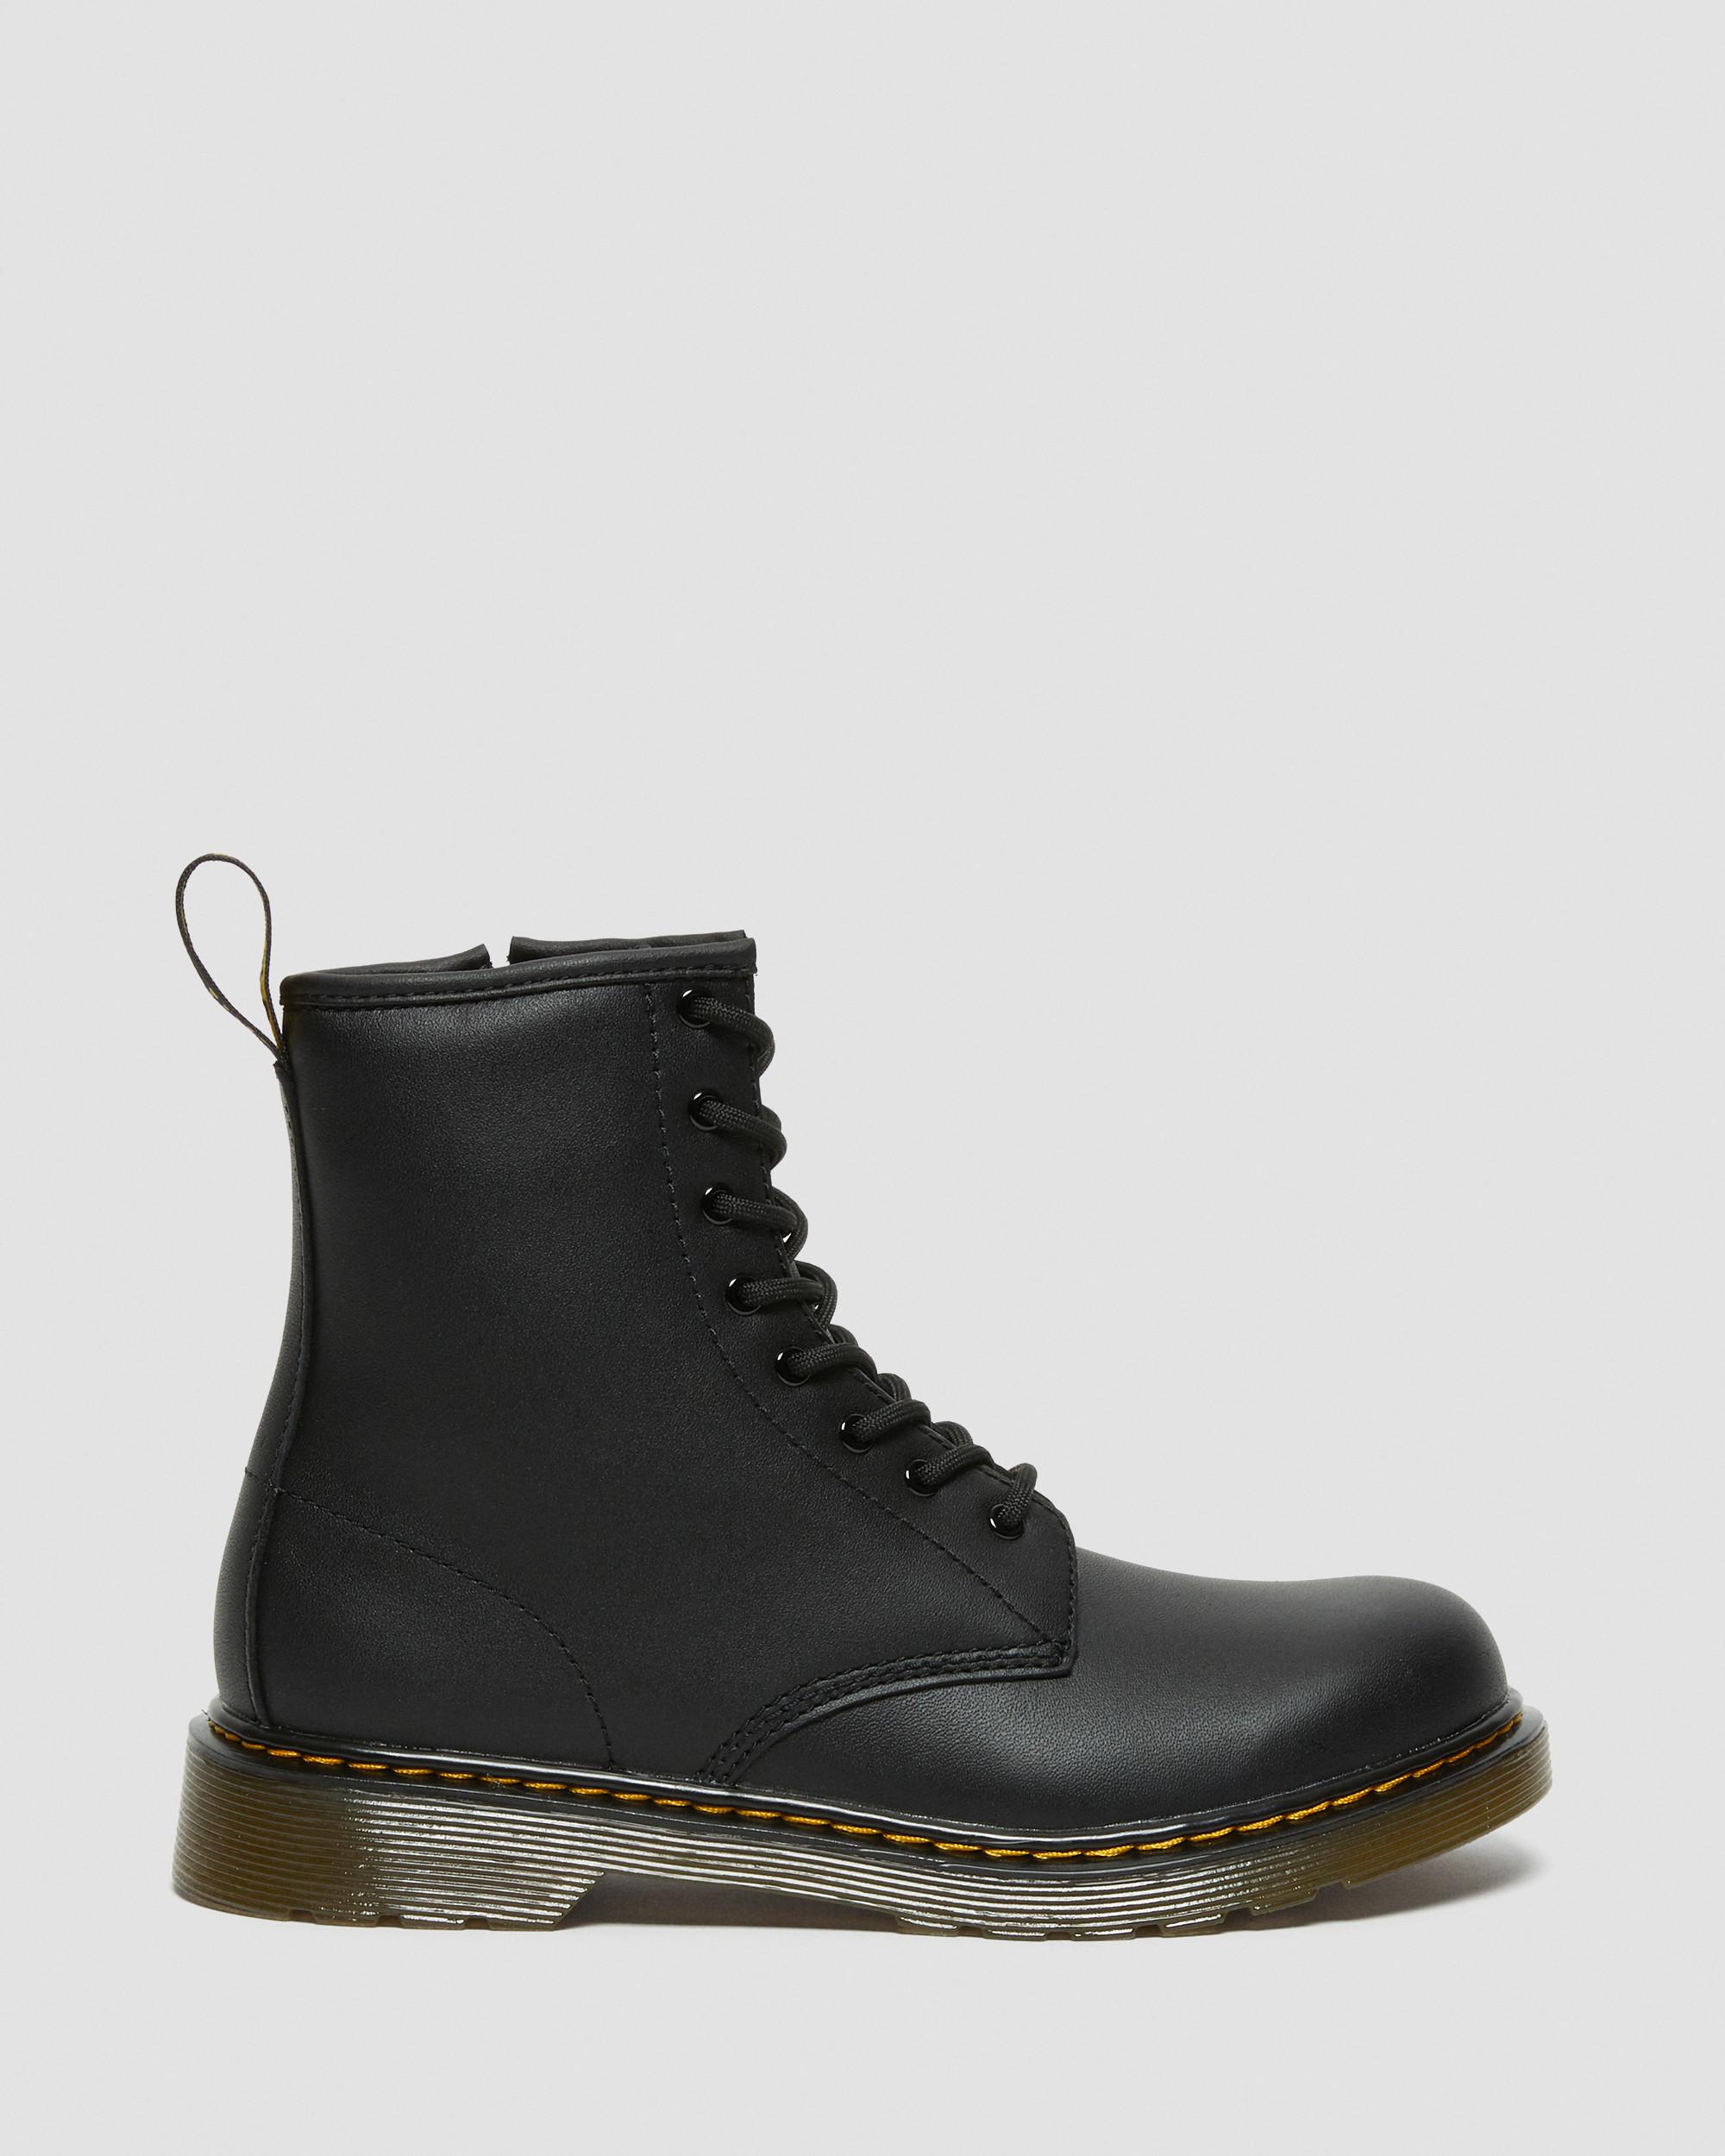 Youth 1460 Softy Martens T Leather Lace Dr. in Up | Black Boots